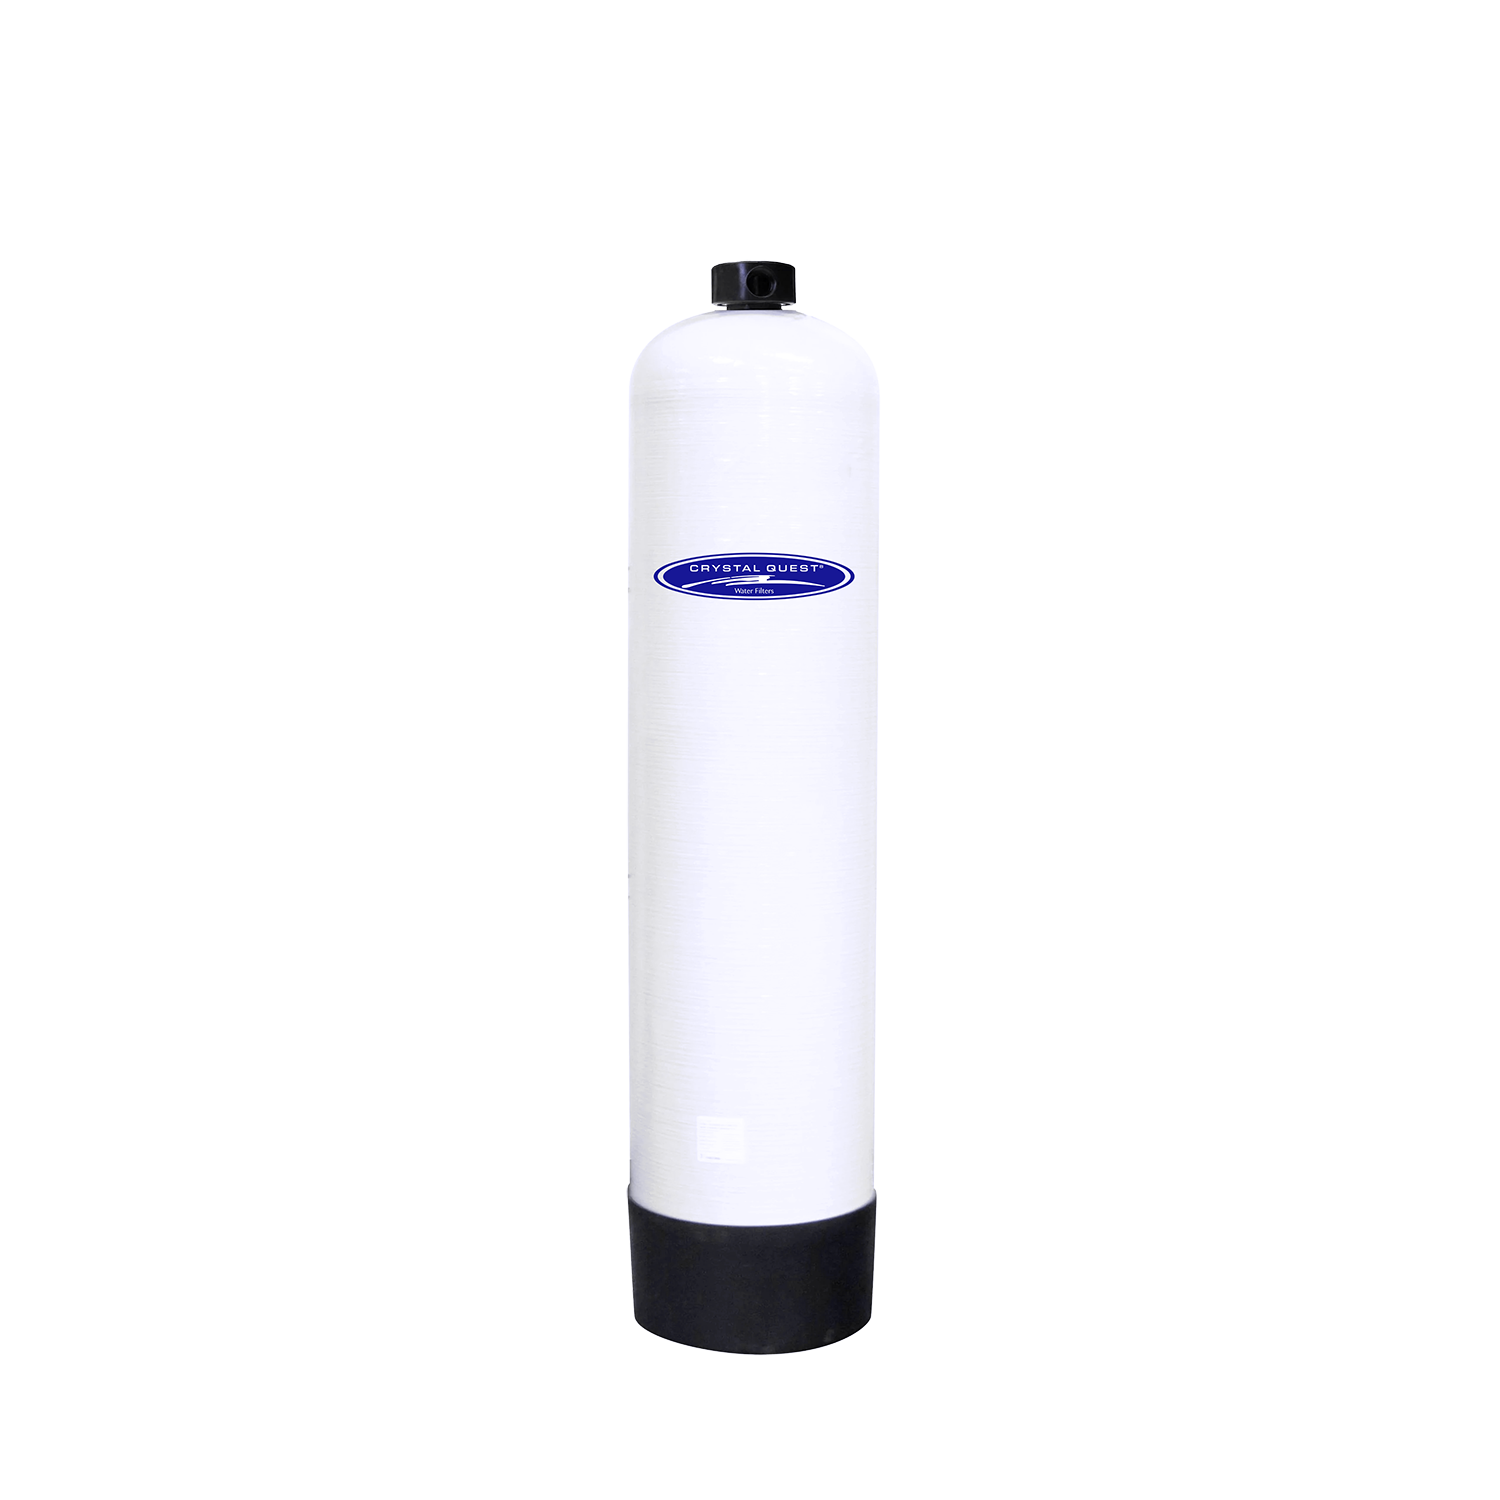 20 GPM / Manual (Upflow) Demineralizing (DI) Water Filtration System - Commercial - Crystal Quest